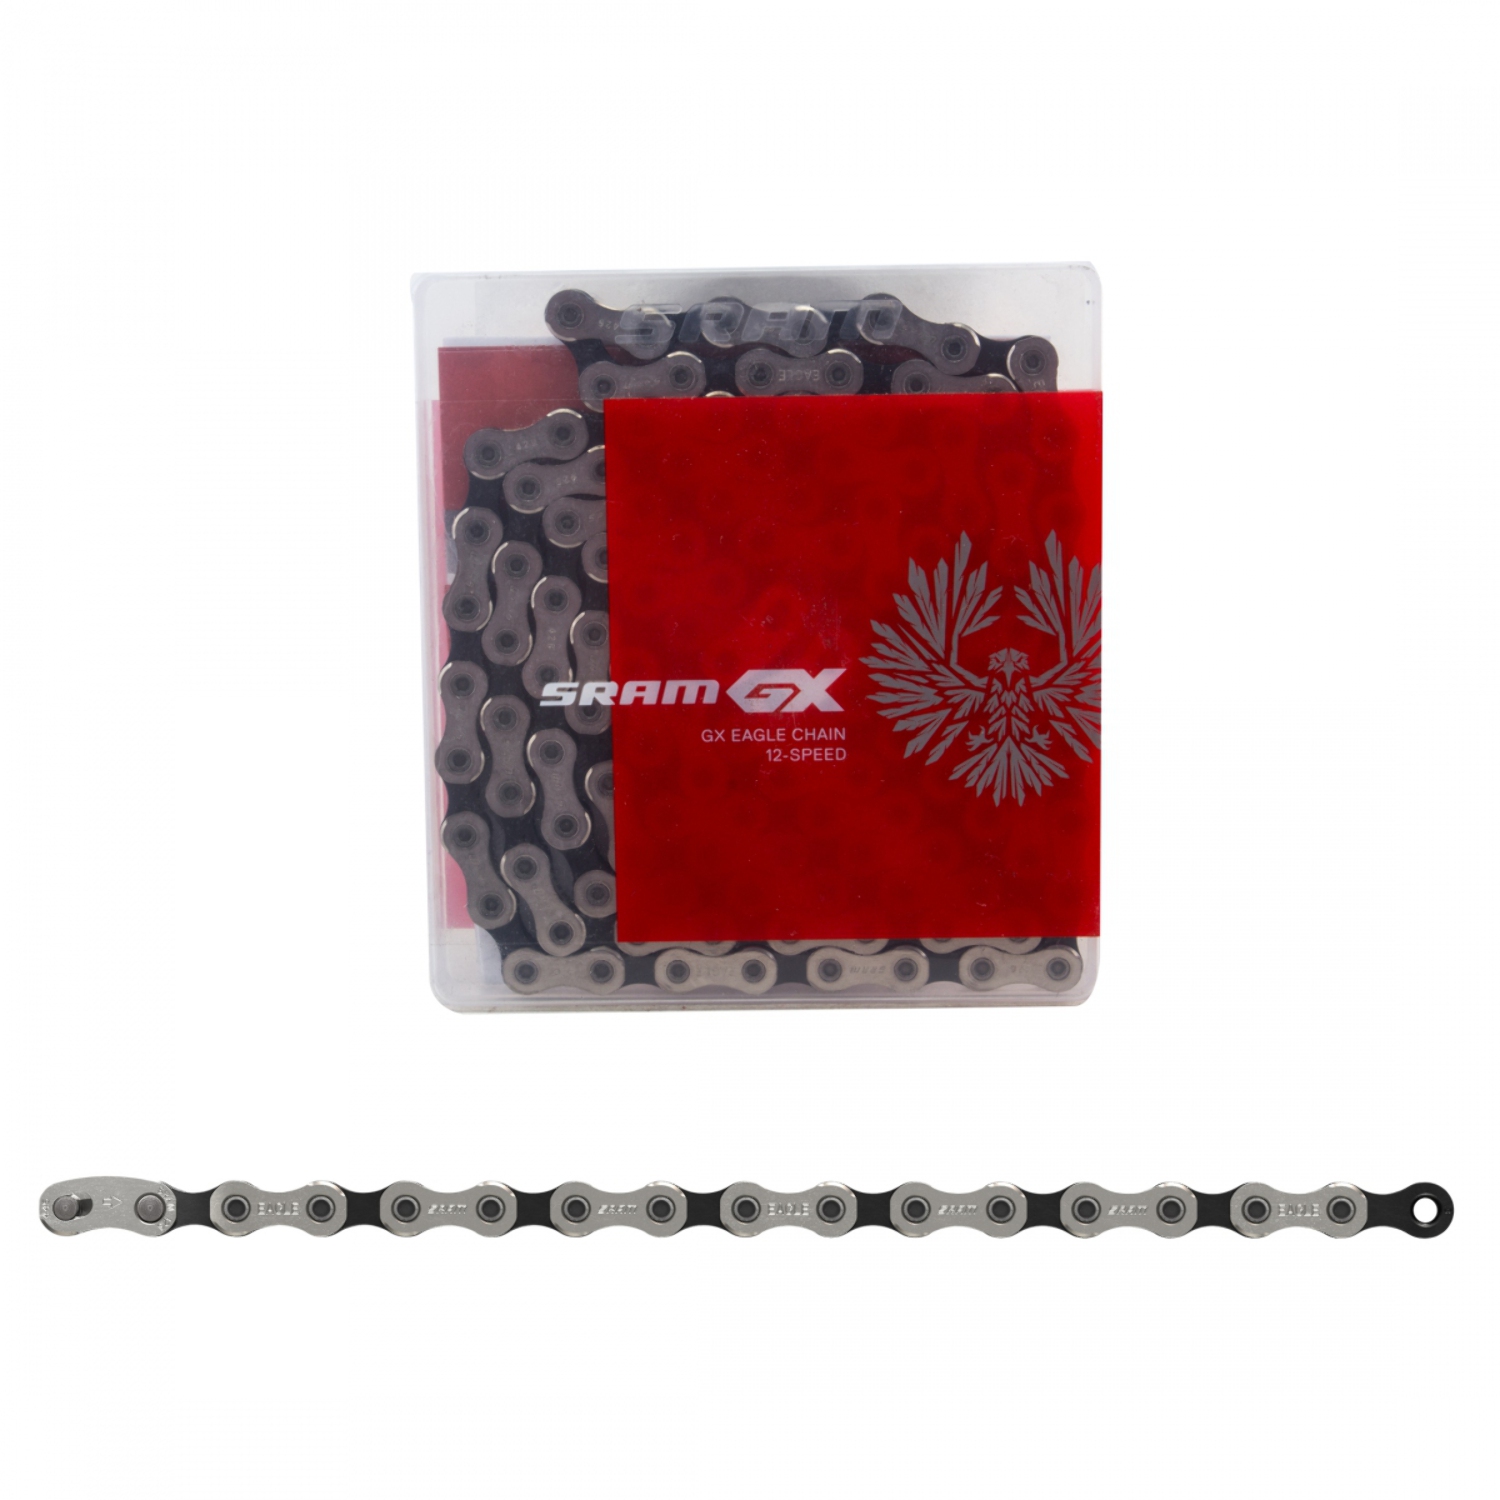 SRAM GX Eagle 12 Speed Chain Silver/Gray - image 1 of 2